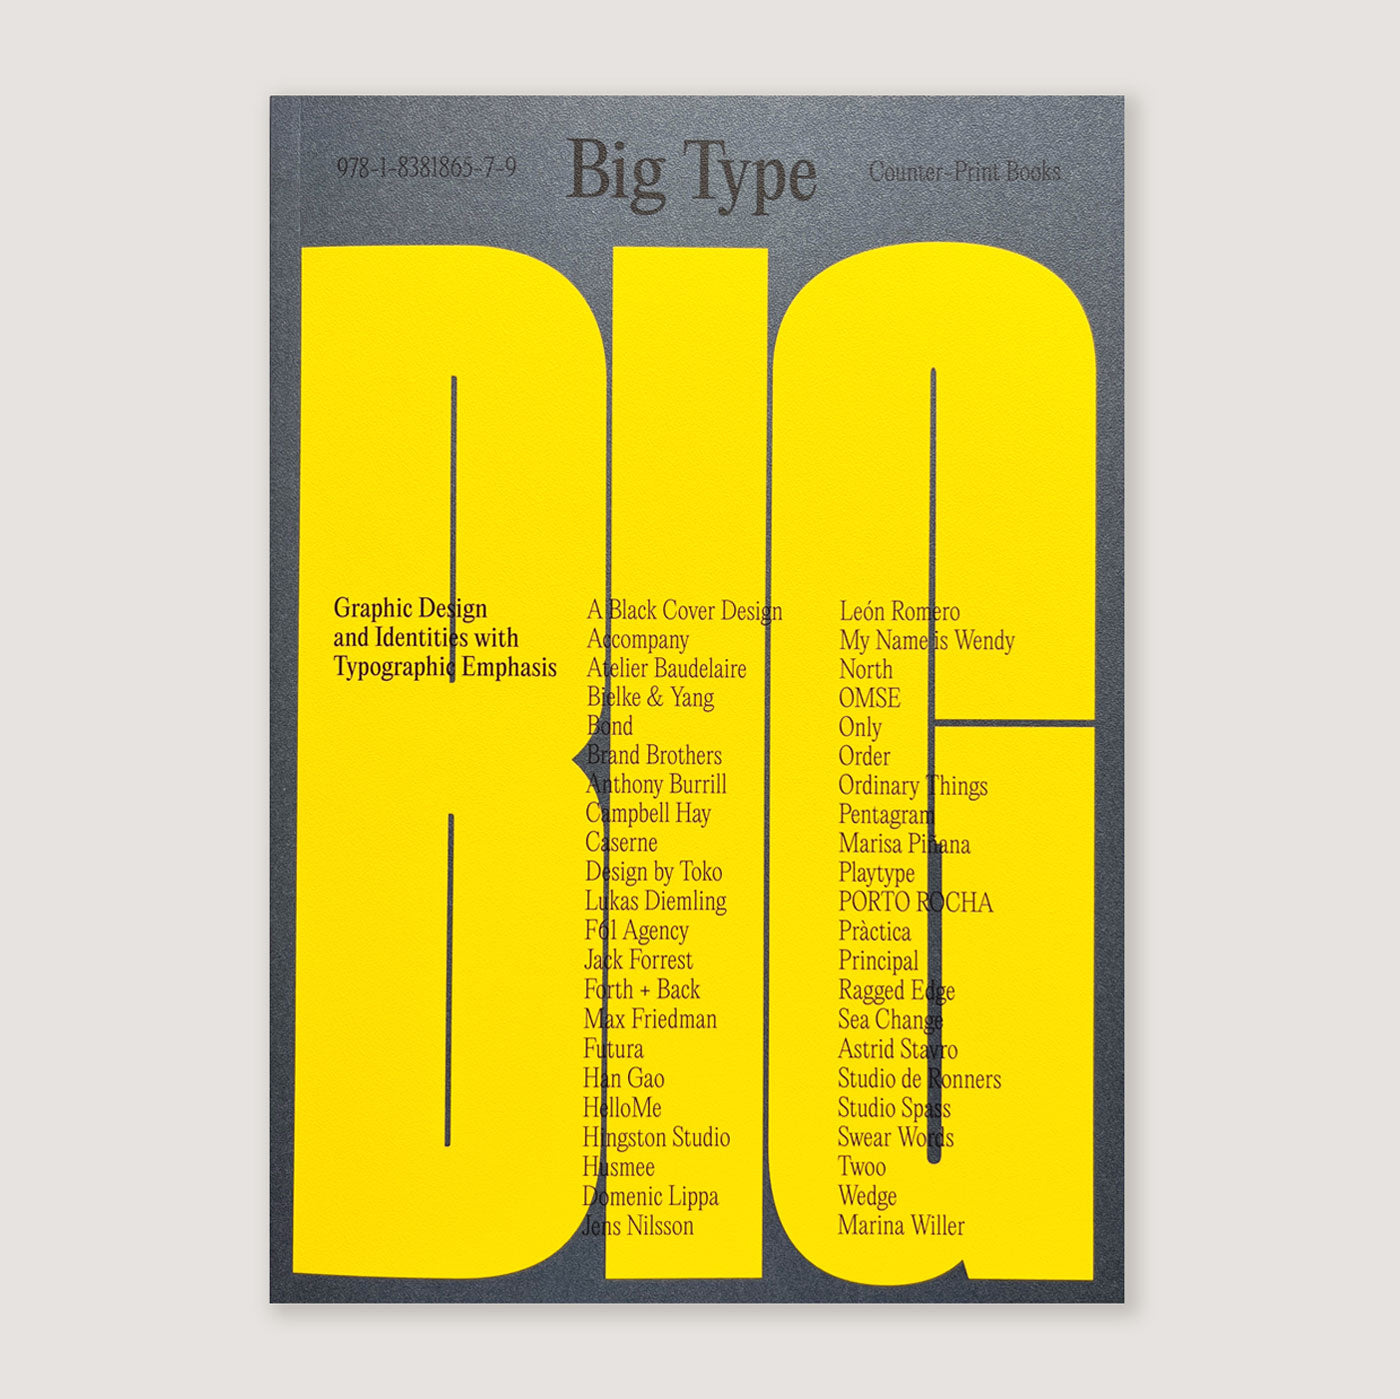 Big Type: Graphic Design and Identities with Typographic Emphasis | Counterprint